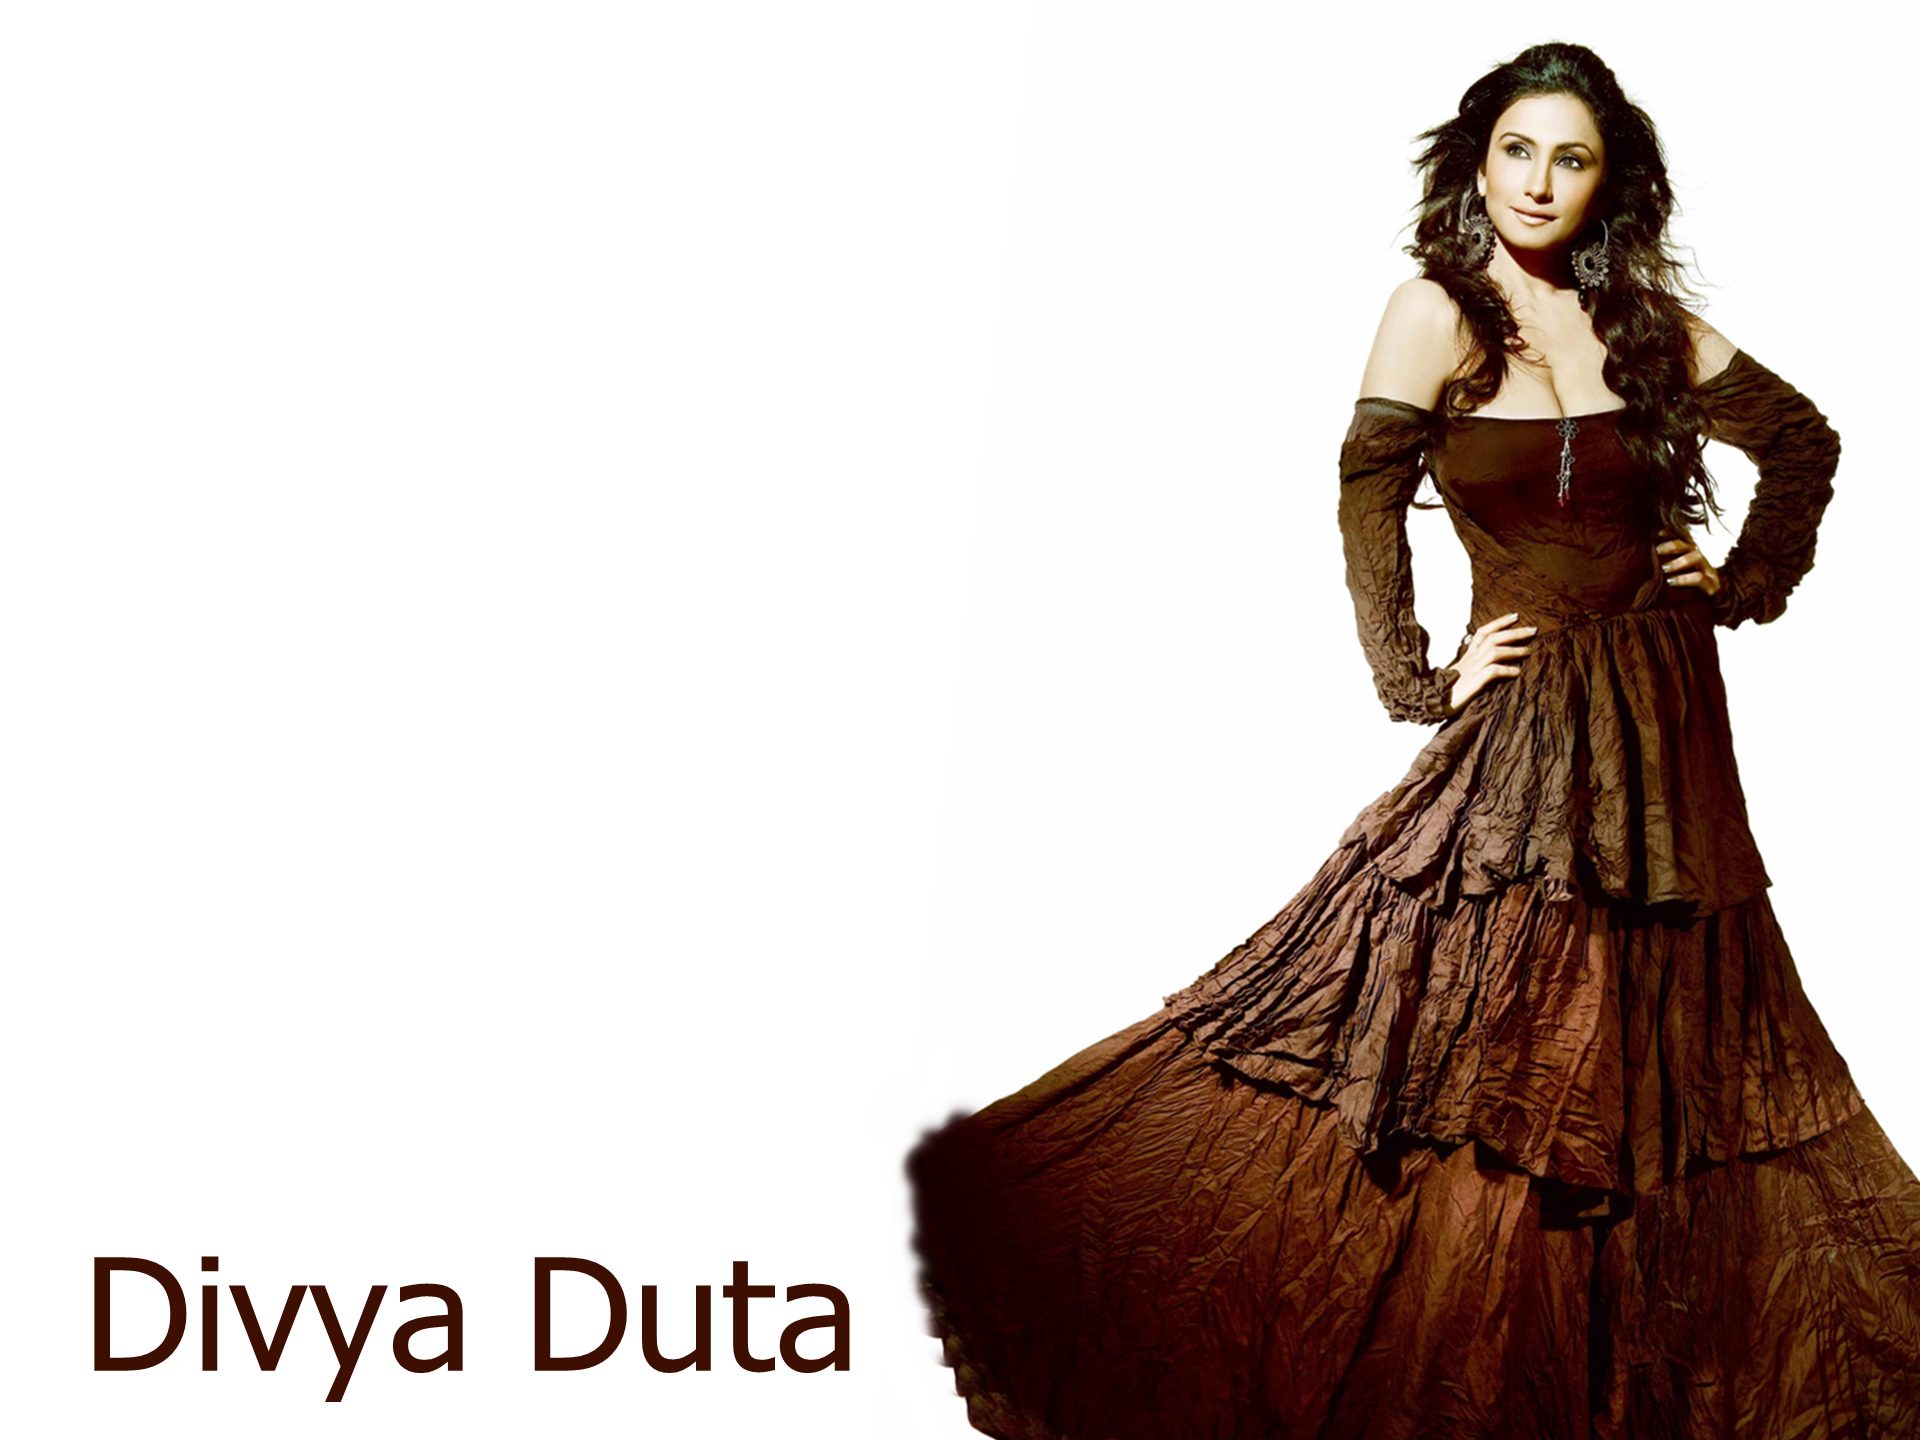 Divya Dutta, Download latest Celebrities Ultra HD Wallpapers, 4k wallpapers  for mobile and desktop